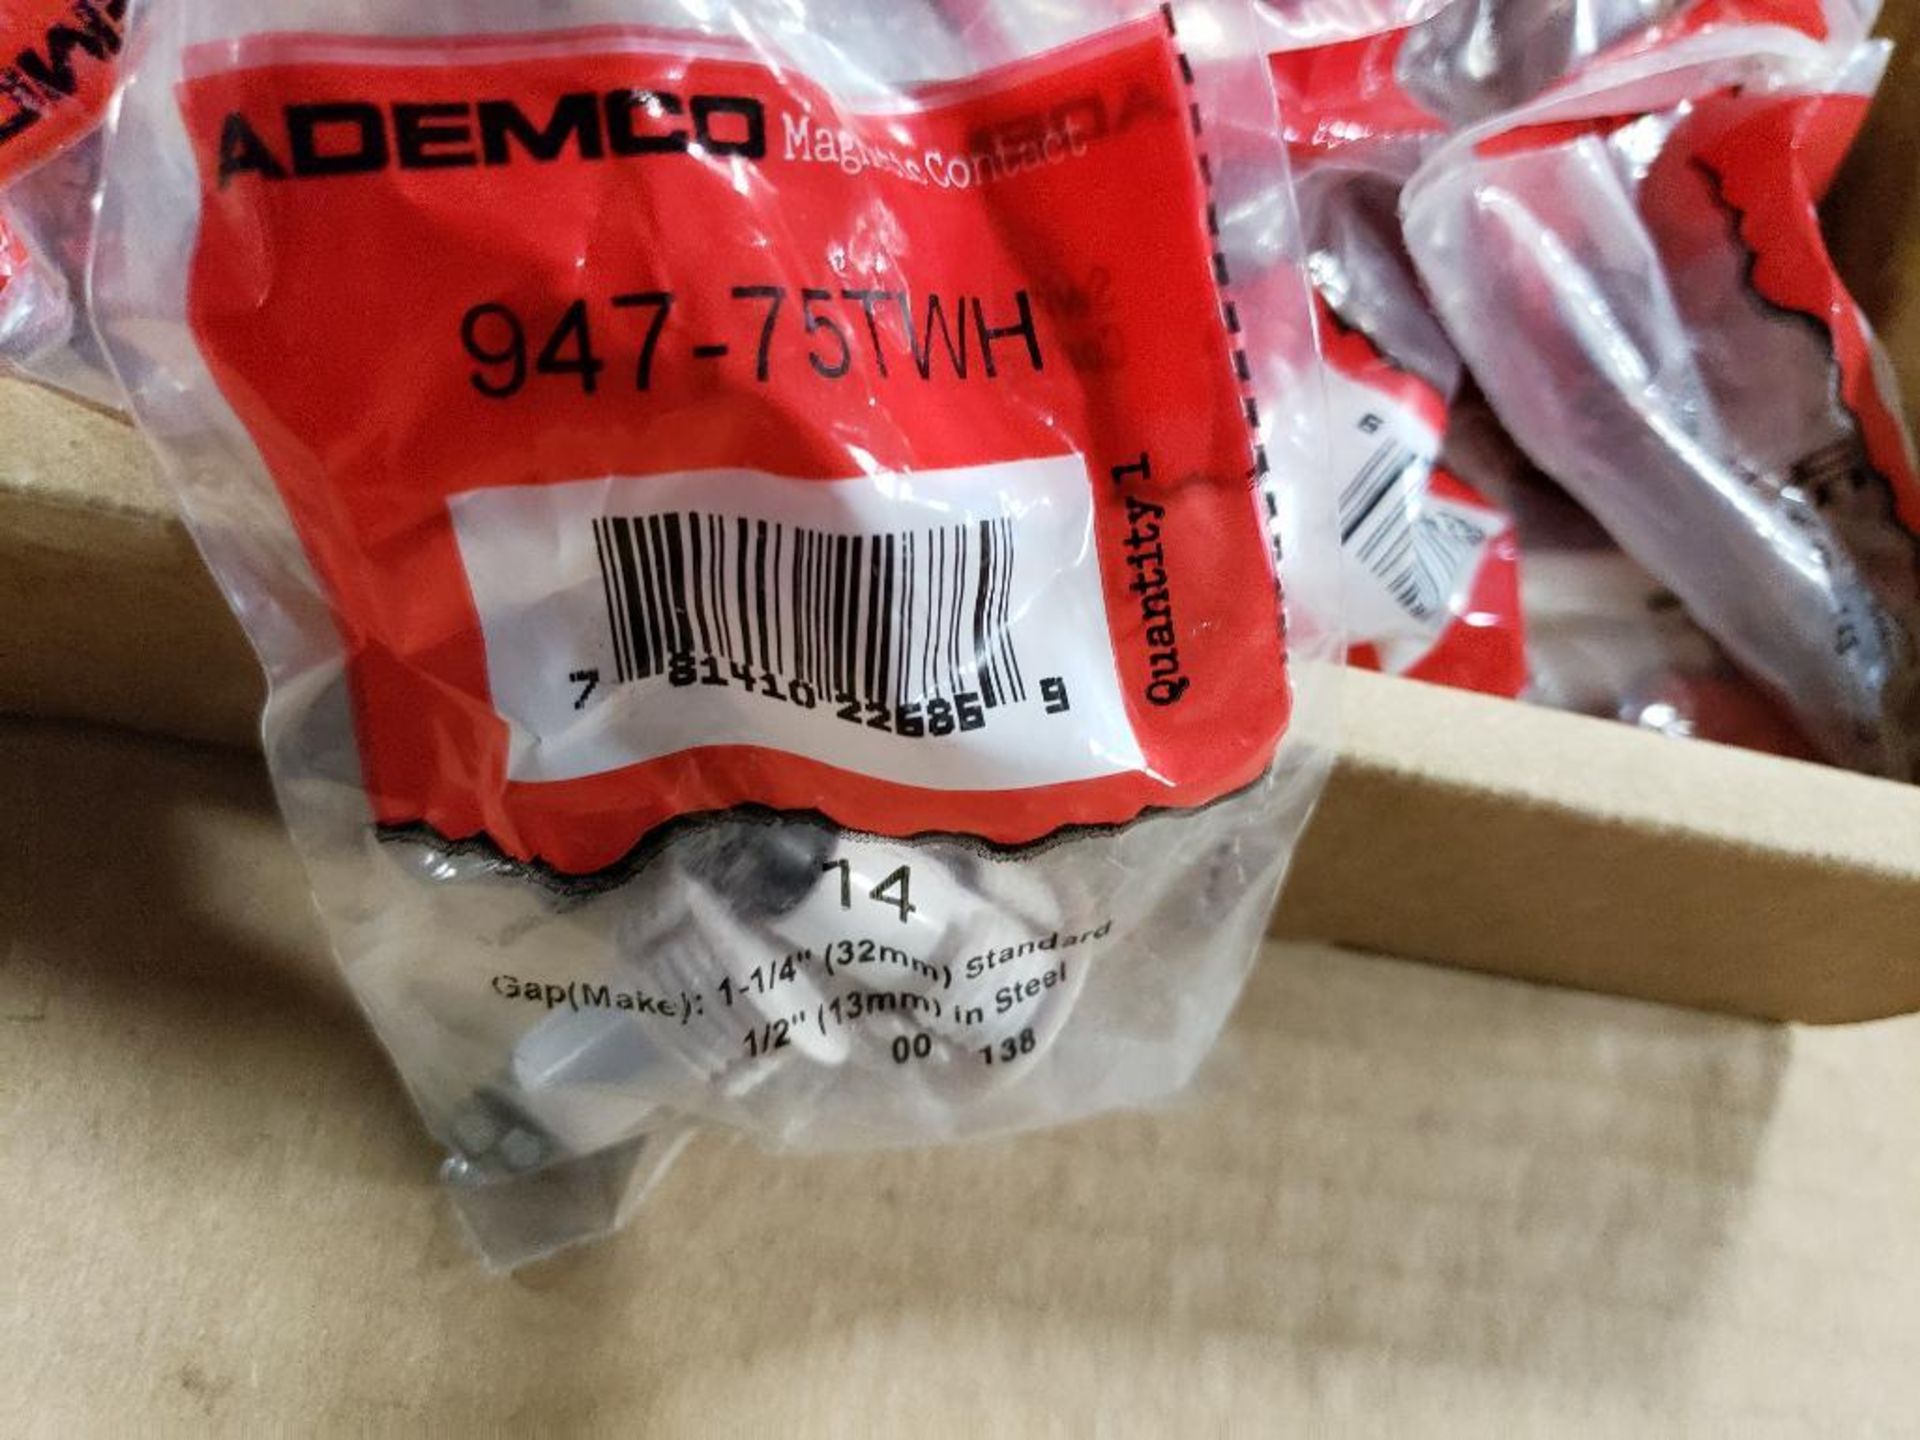 Large assortment of Ademco switches. New in package. - Image 3 of 4